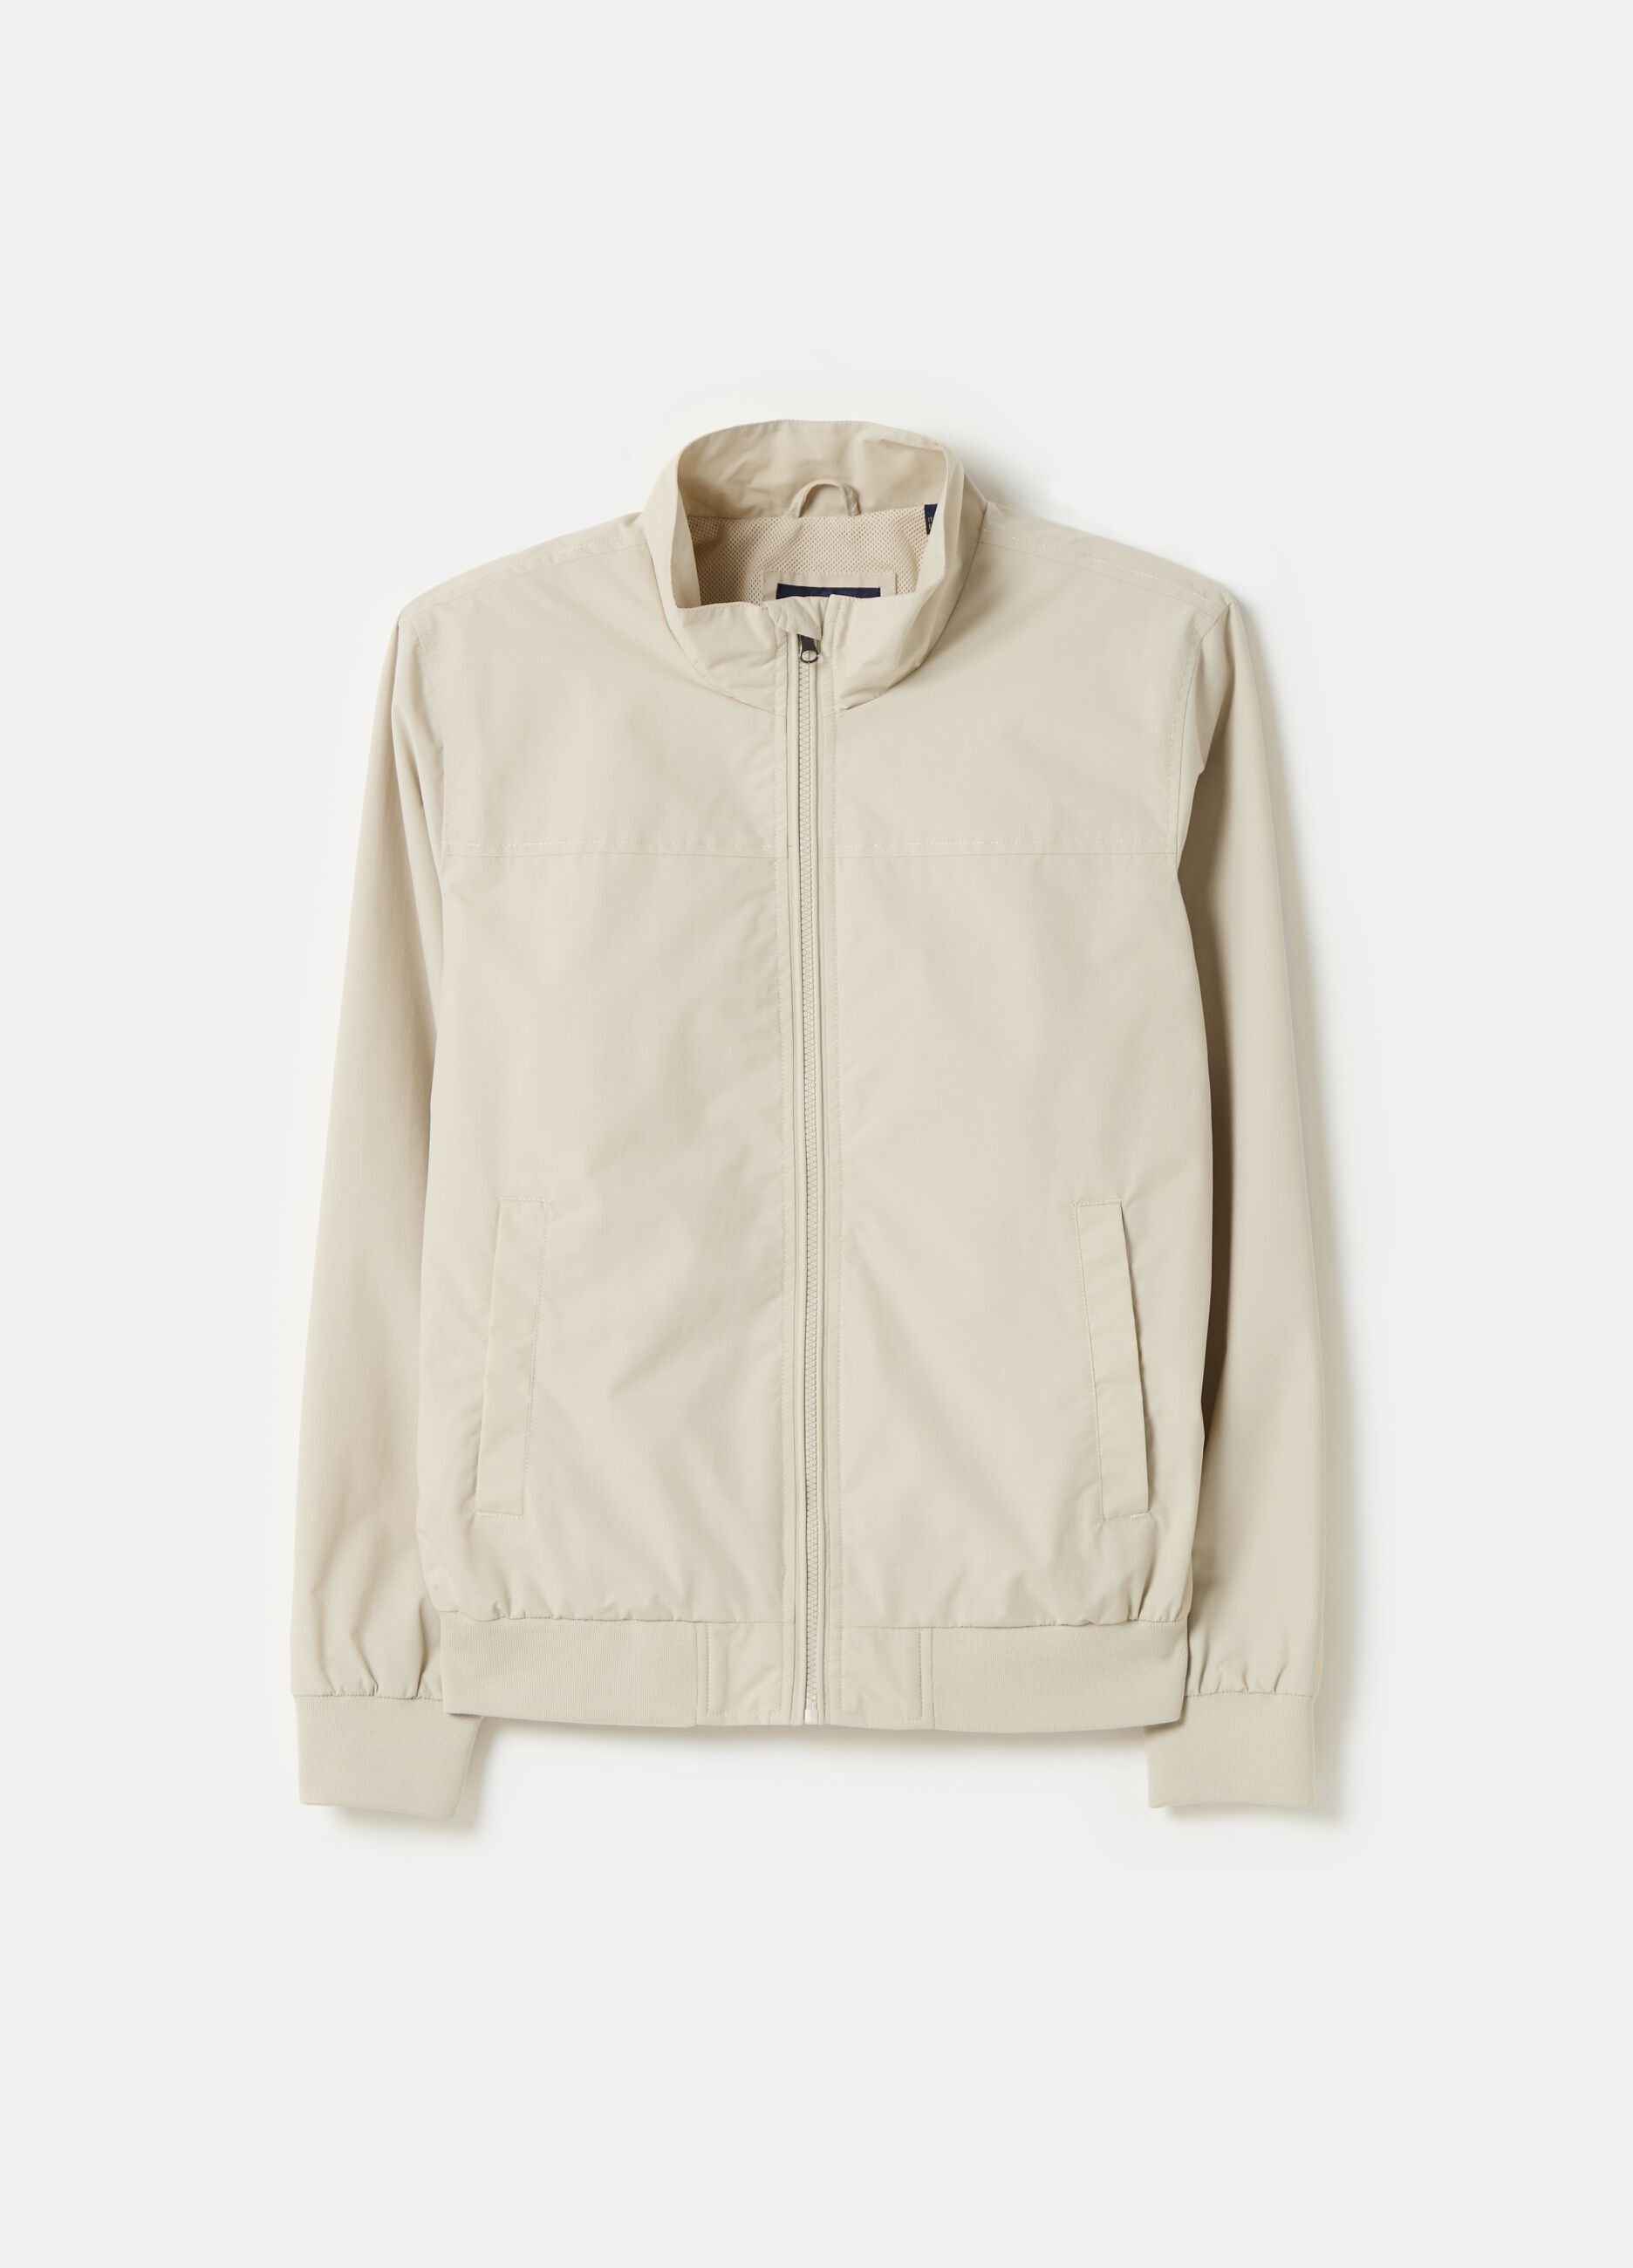 Full-zip bomber jacket with high neck